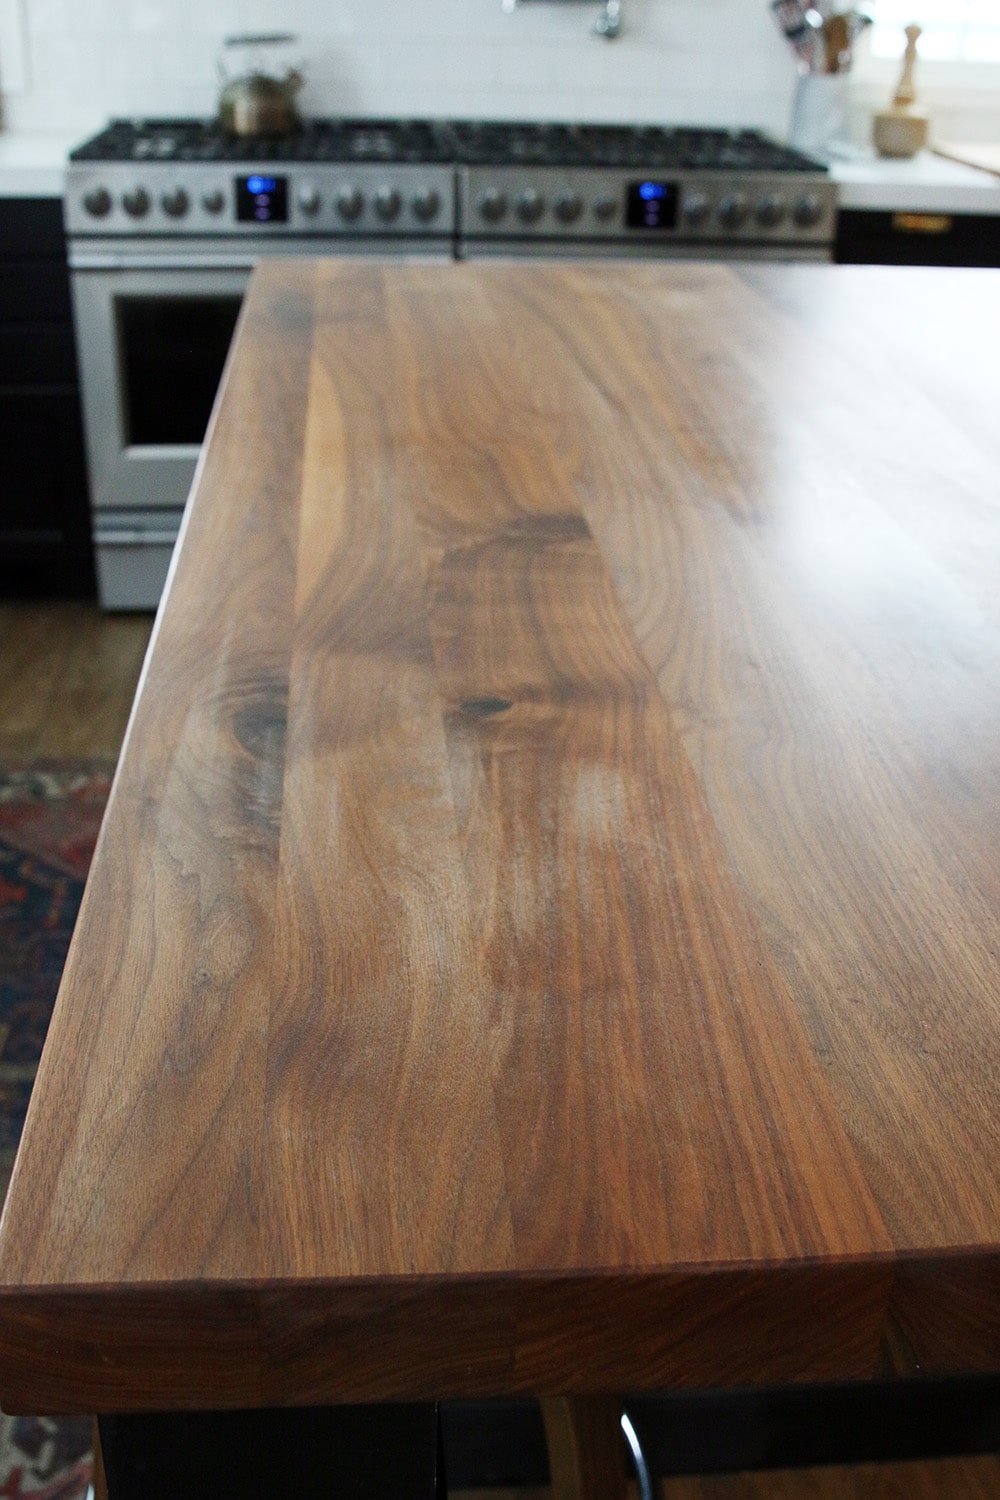 Refinished Our Butcher Block Countertop, How To Make Butcher Block Countertops Shine